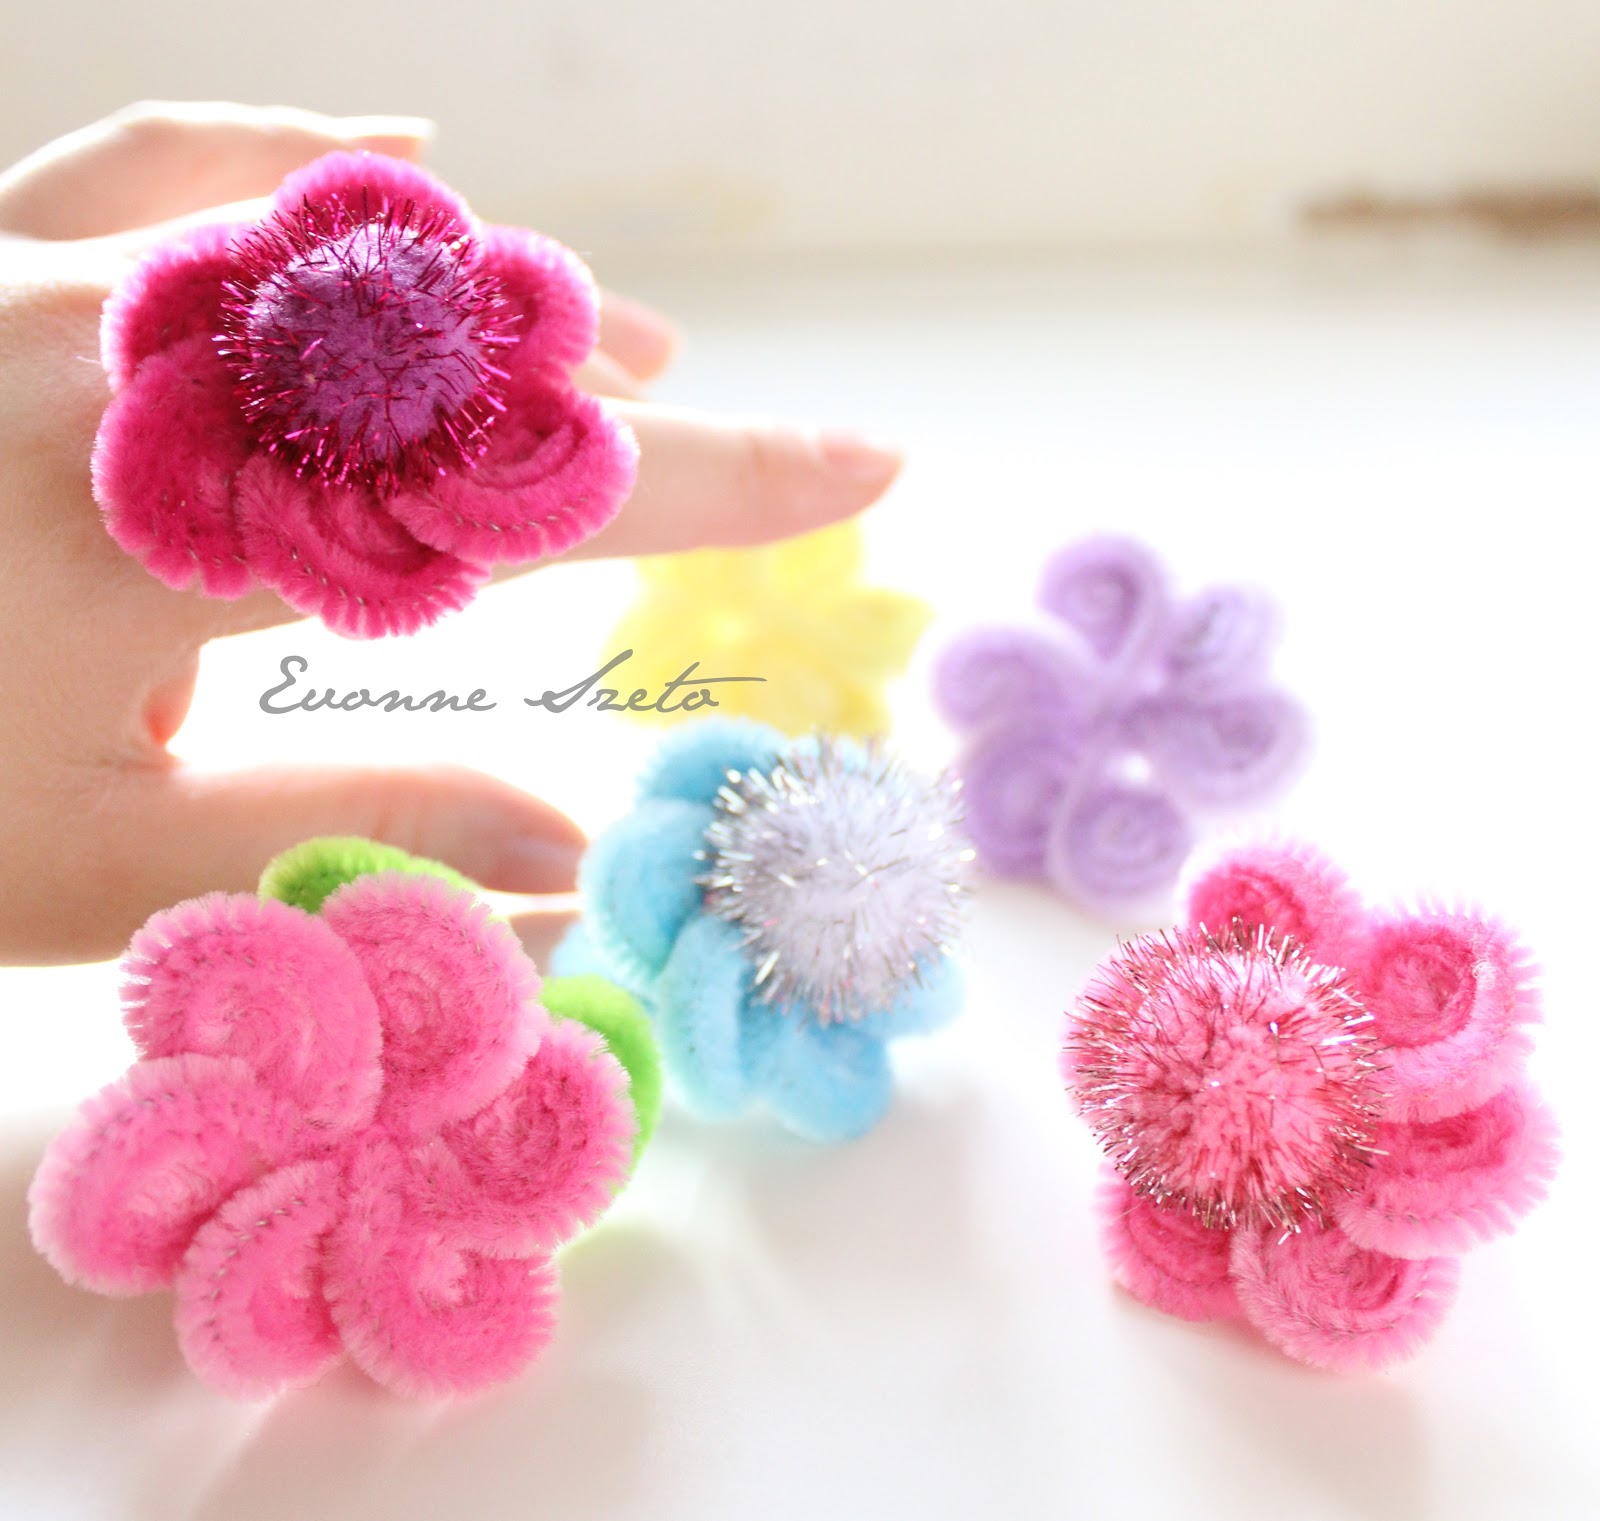 Download sweet from the heart: Pipe Cleaner Daisy Rings Tutorial & DIY: I heart Sweets cell phone cover